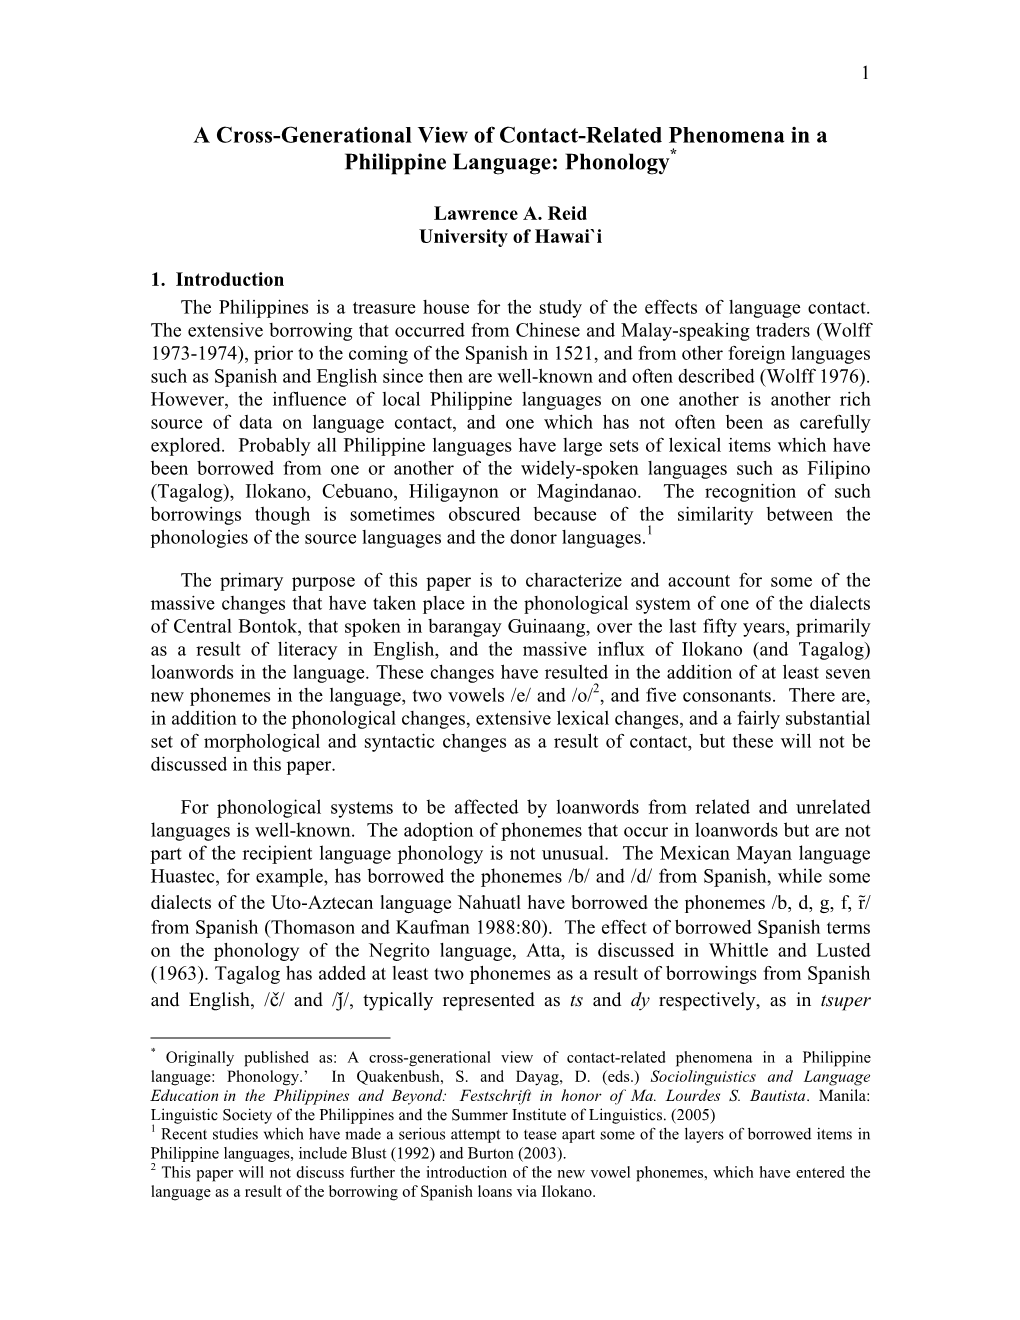 A Cross-Generational View of Contact-Related Phenomena in a Philippine Language: Phonology*